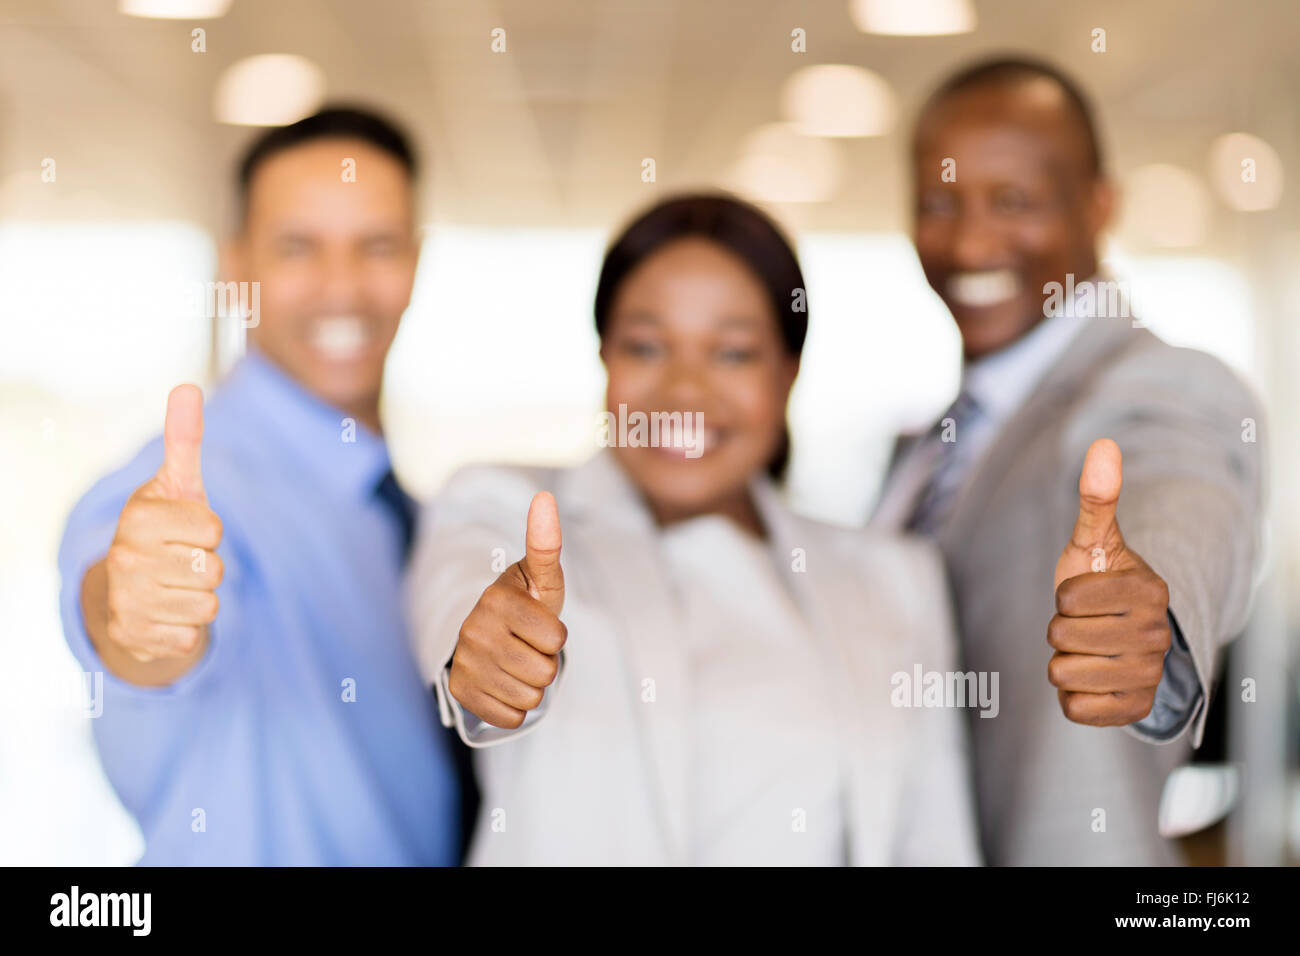 closeup portrait of business team giving thumbs up Stock Photo